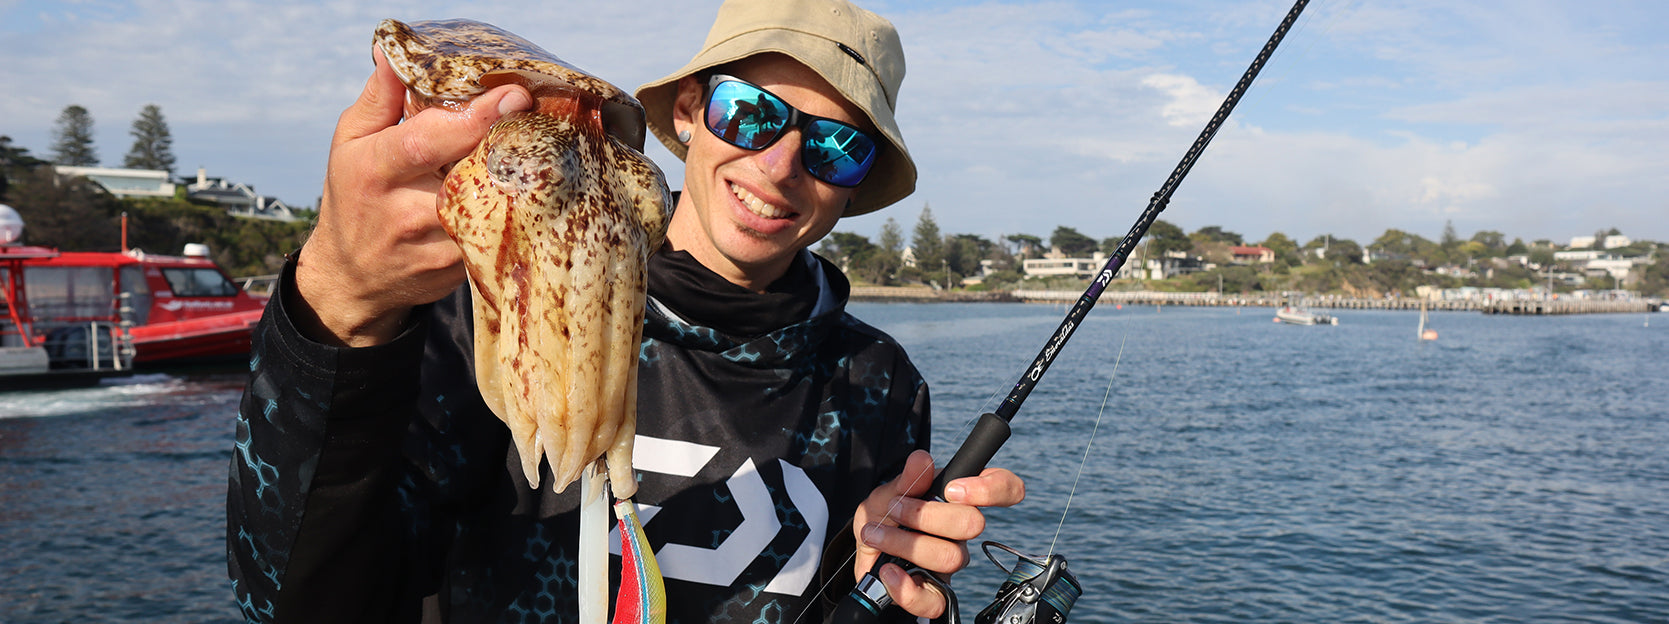 Successful berley surf casting tips part 3 - The Fishing Website